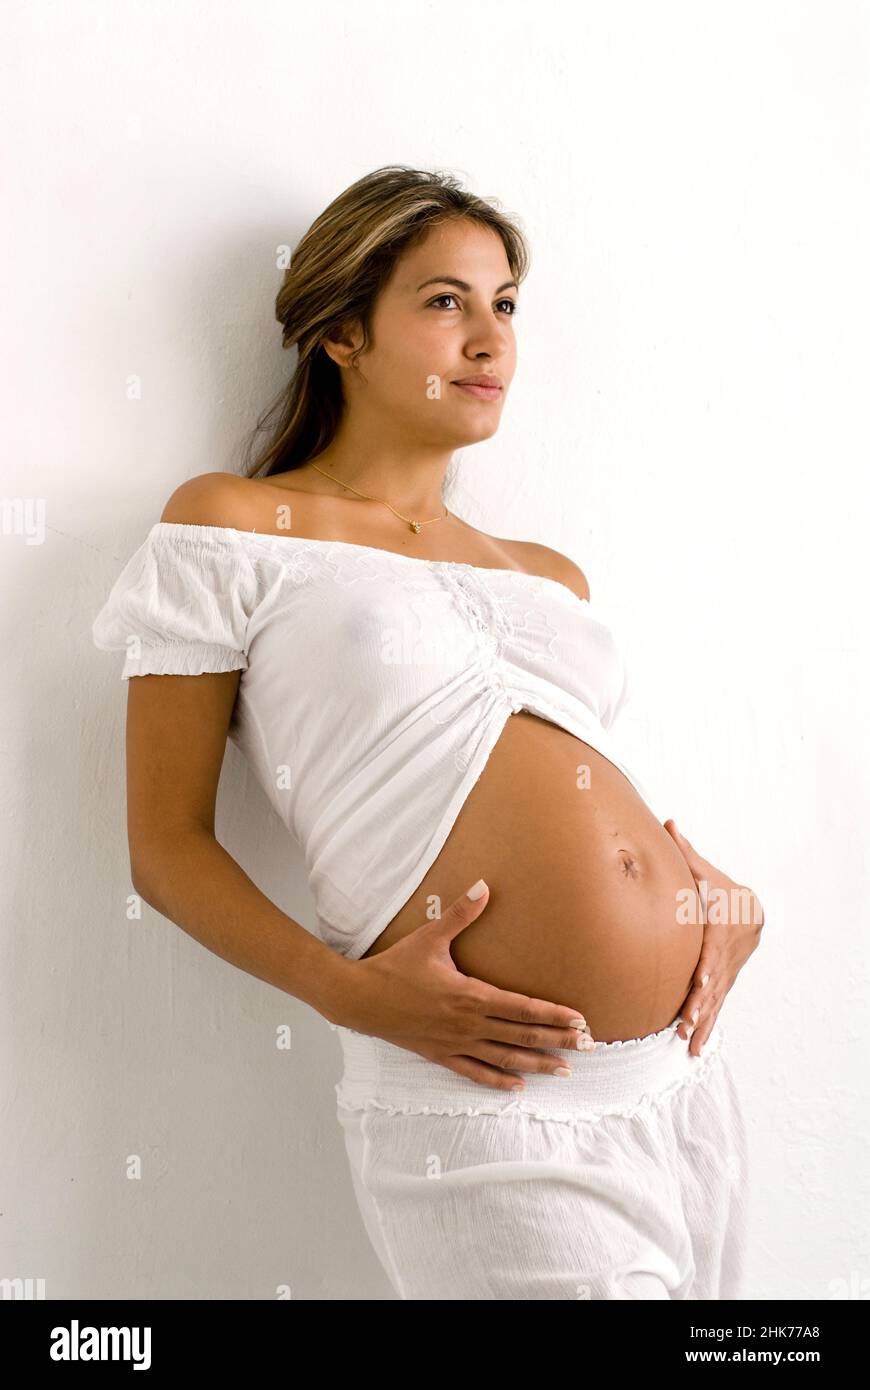 Portrait of young pregnant Hispanic woman, facing forward, holding belly Stock Photo